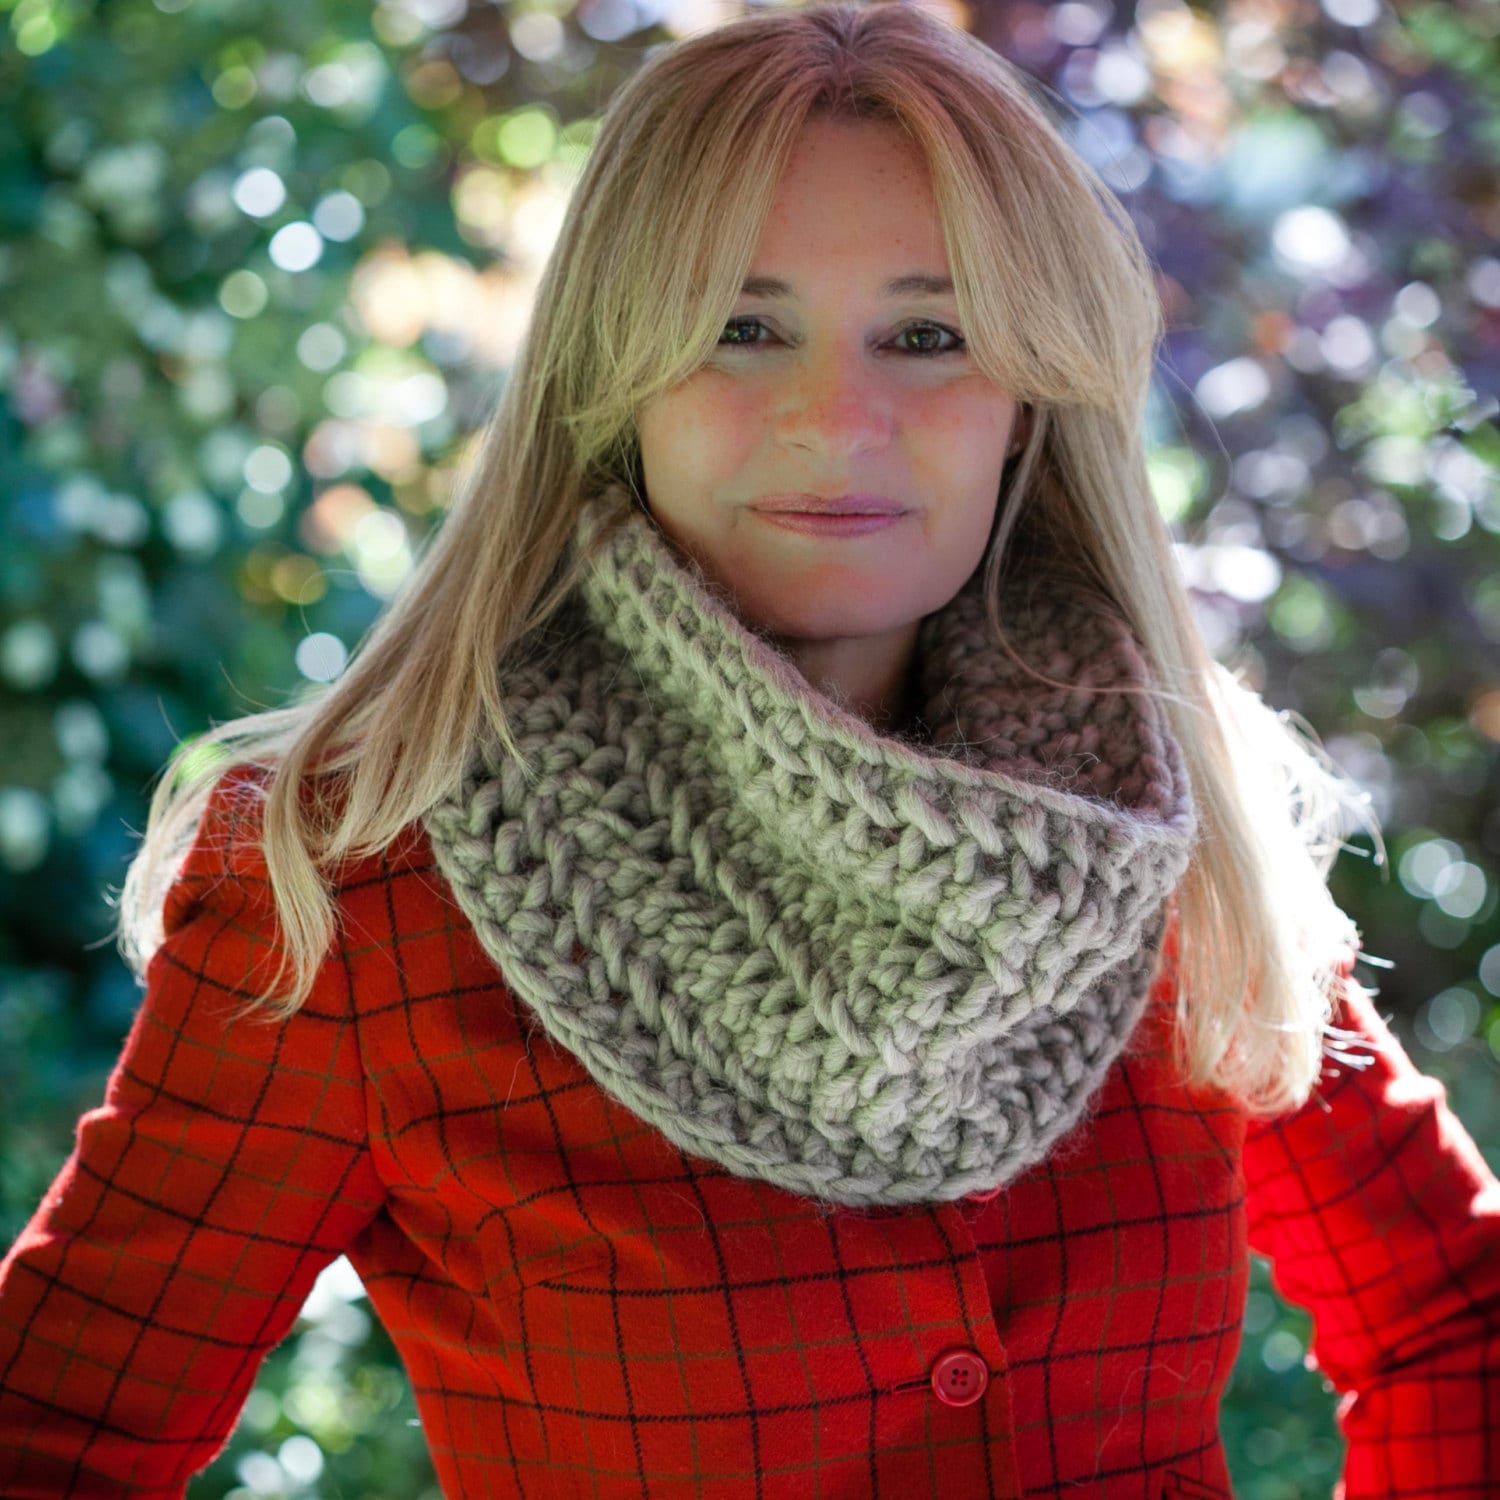 Loom Knit Chunky Lace Infinity Scarf Cowl PATTERN. Loom Knit Lace Cowl  PATTERN. Loom Knitting Patterns. PDF Download. Ladies Loom Knit Scarf 